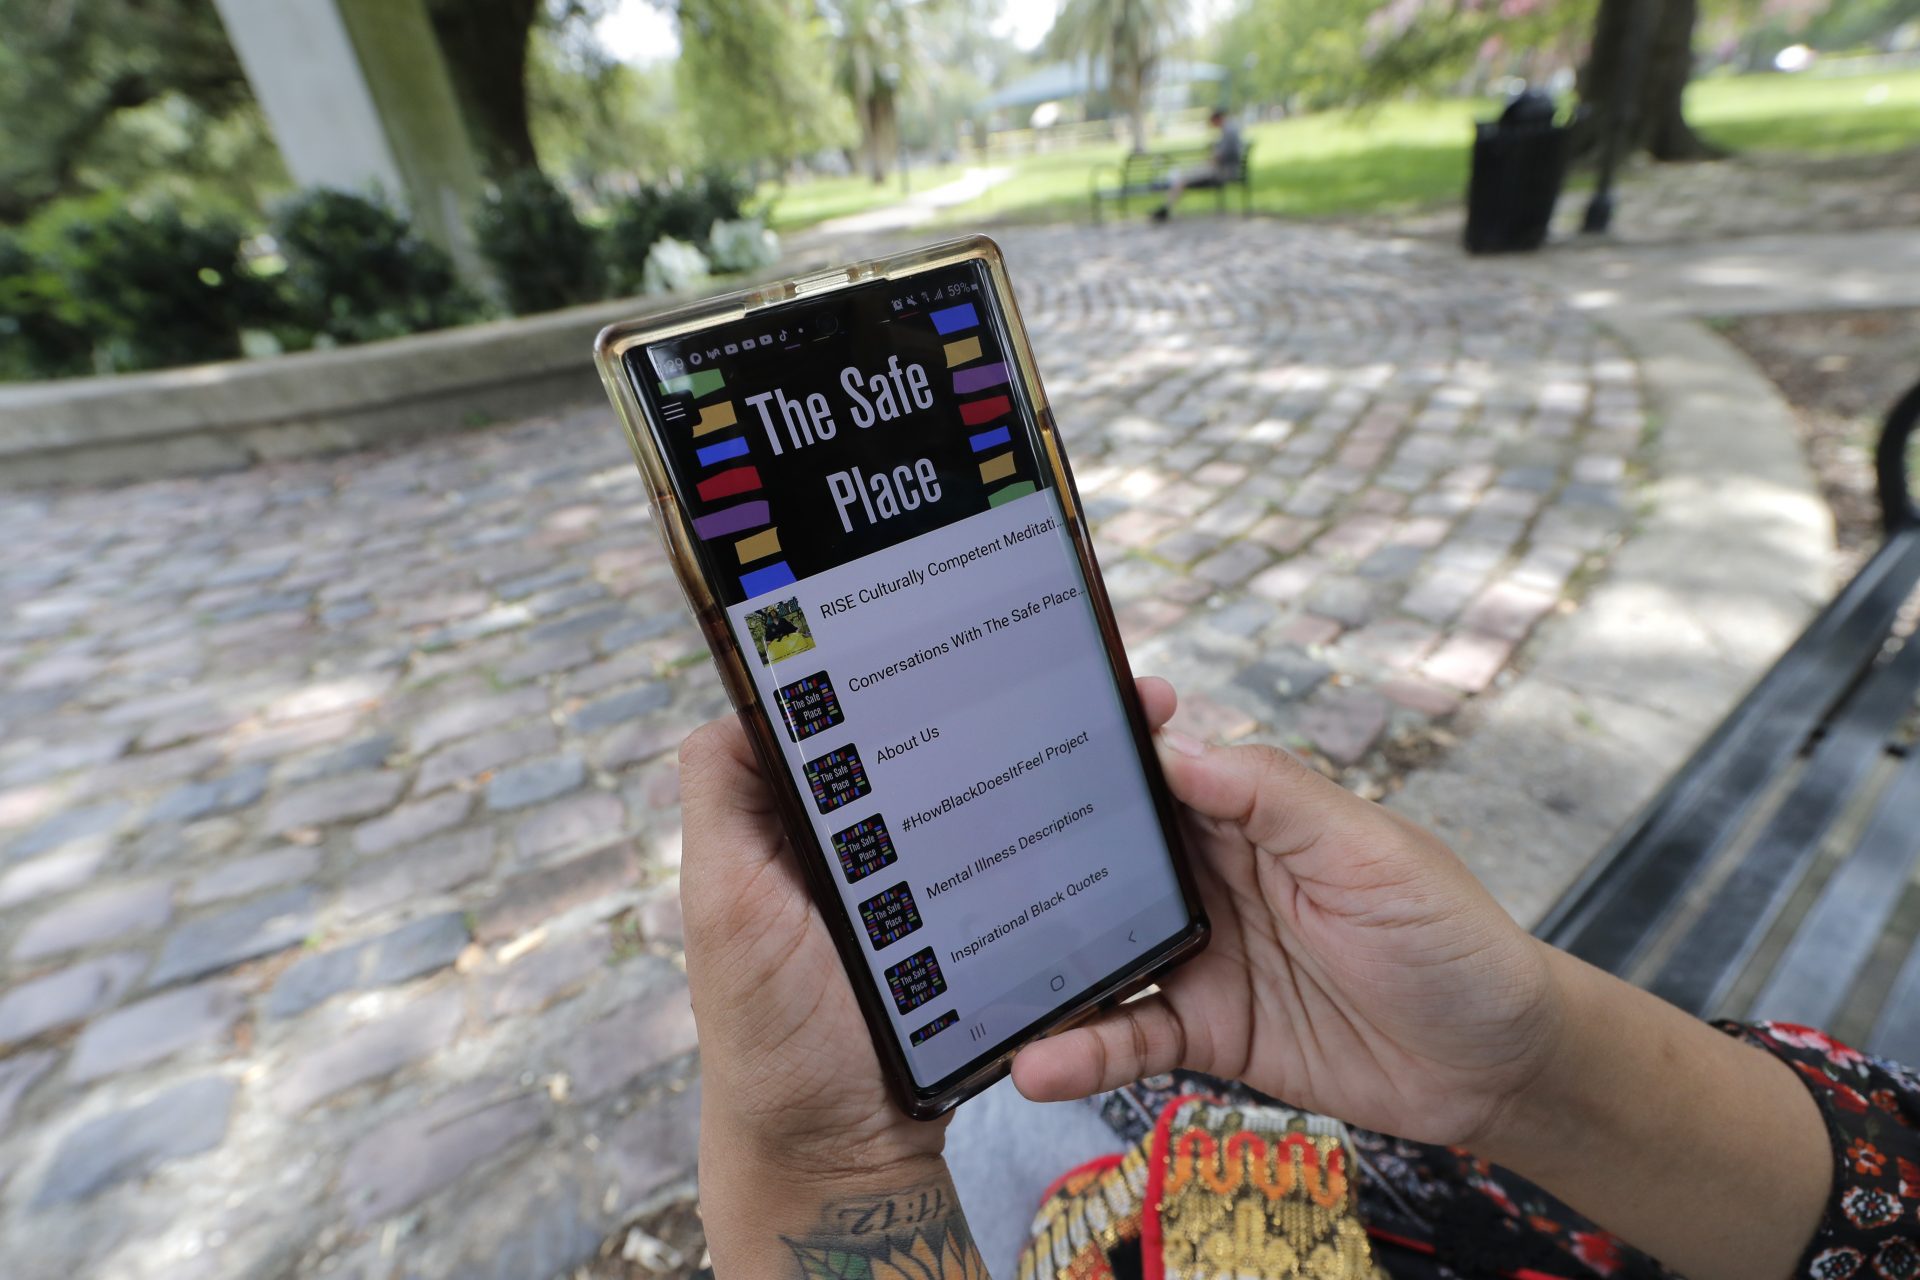 Jasmin Pierre poses for a photo with her smartphone app, in New Orleans, Thursday, July 2, 2020. Pierre, who survived multiple suicide attempts, doesn't want people struggling alone. She created The Safe Place, a free Black-oriented mental health app that's seen more signups during the pandemic.